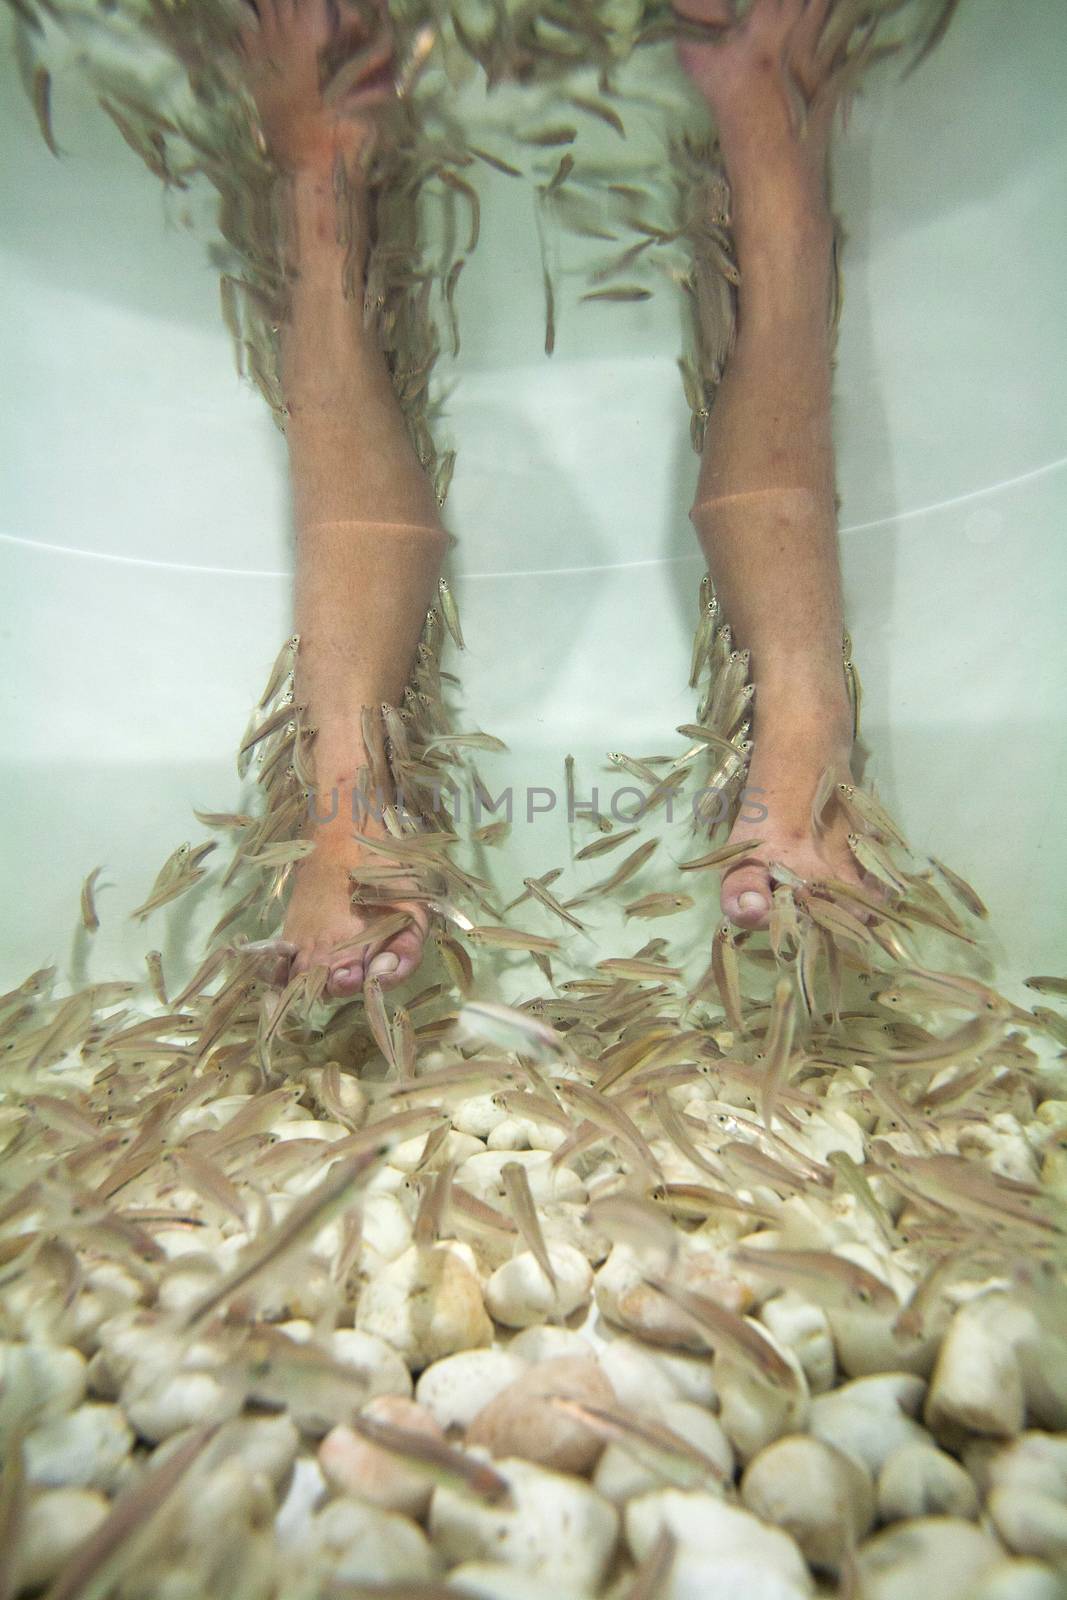 fishspa by think4photop